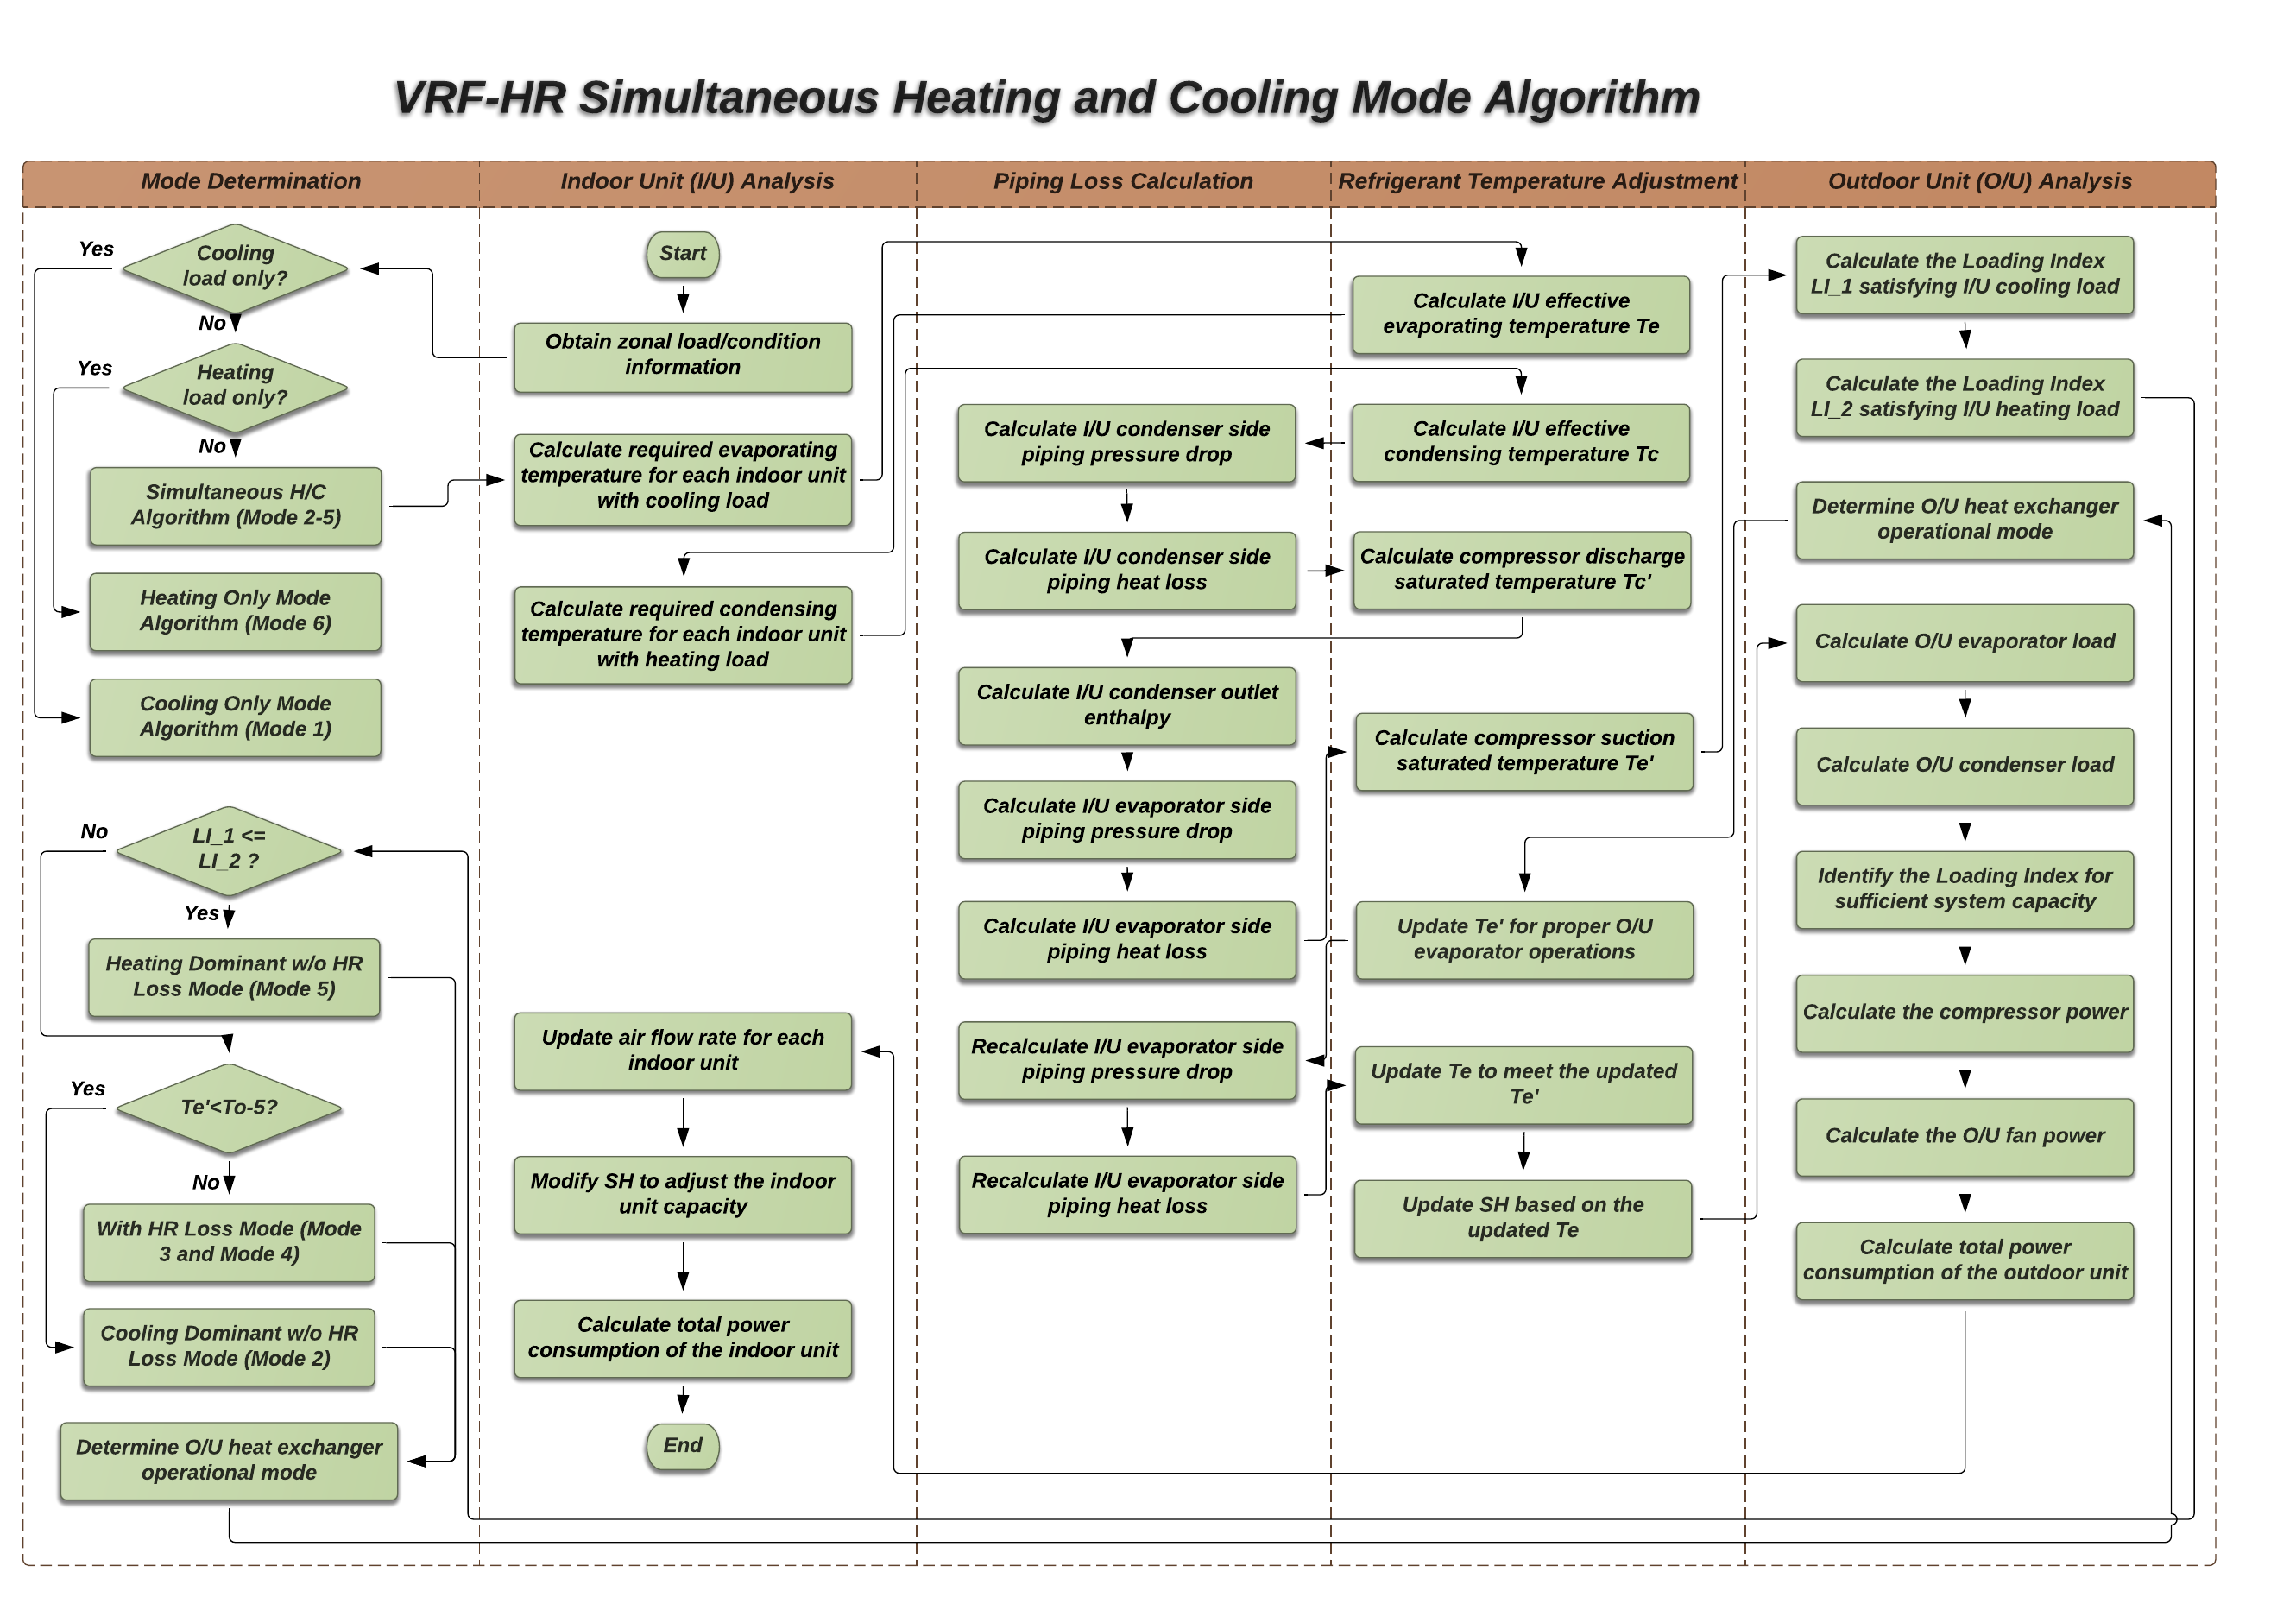 Schematic chart of the new VRF-HR algorithm: Simultaneous Heating and Cooling Mode [fig:VRF-HR-AlgorithmOverview-Mode2-5]